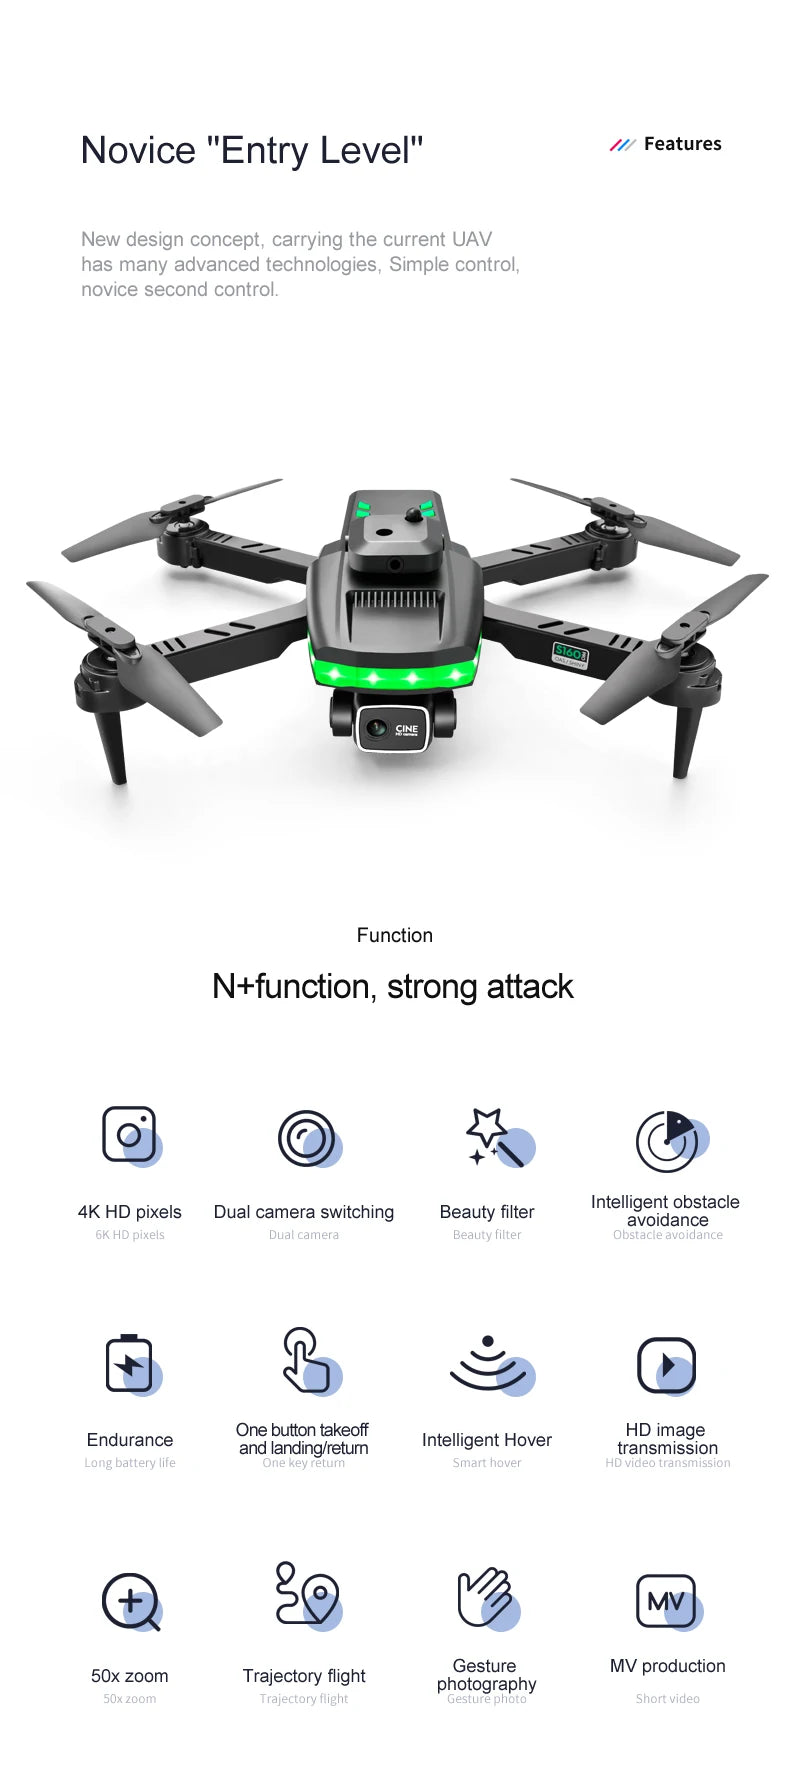 S160 Mini Drone, novice "entry level" features new design concept; carrying the current